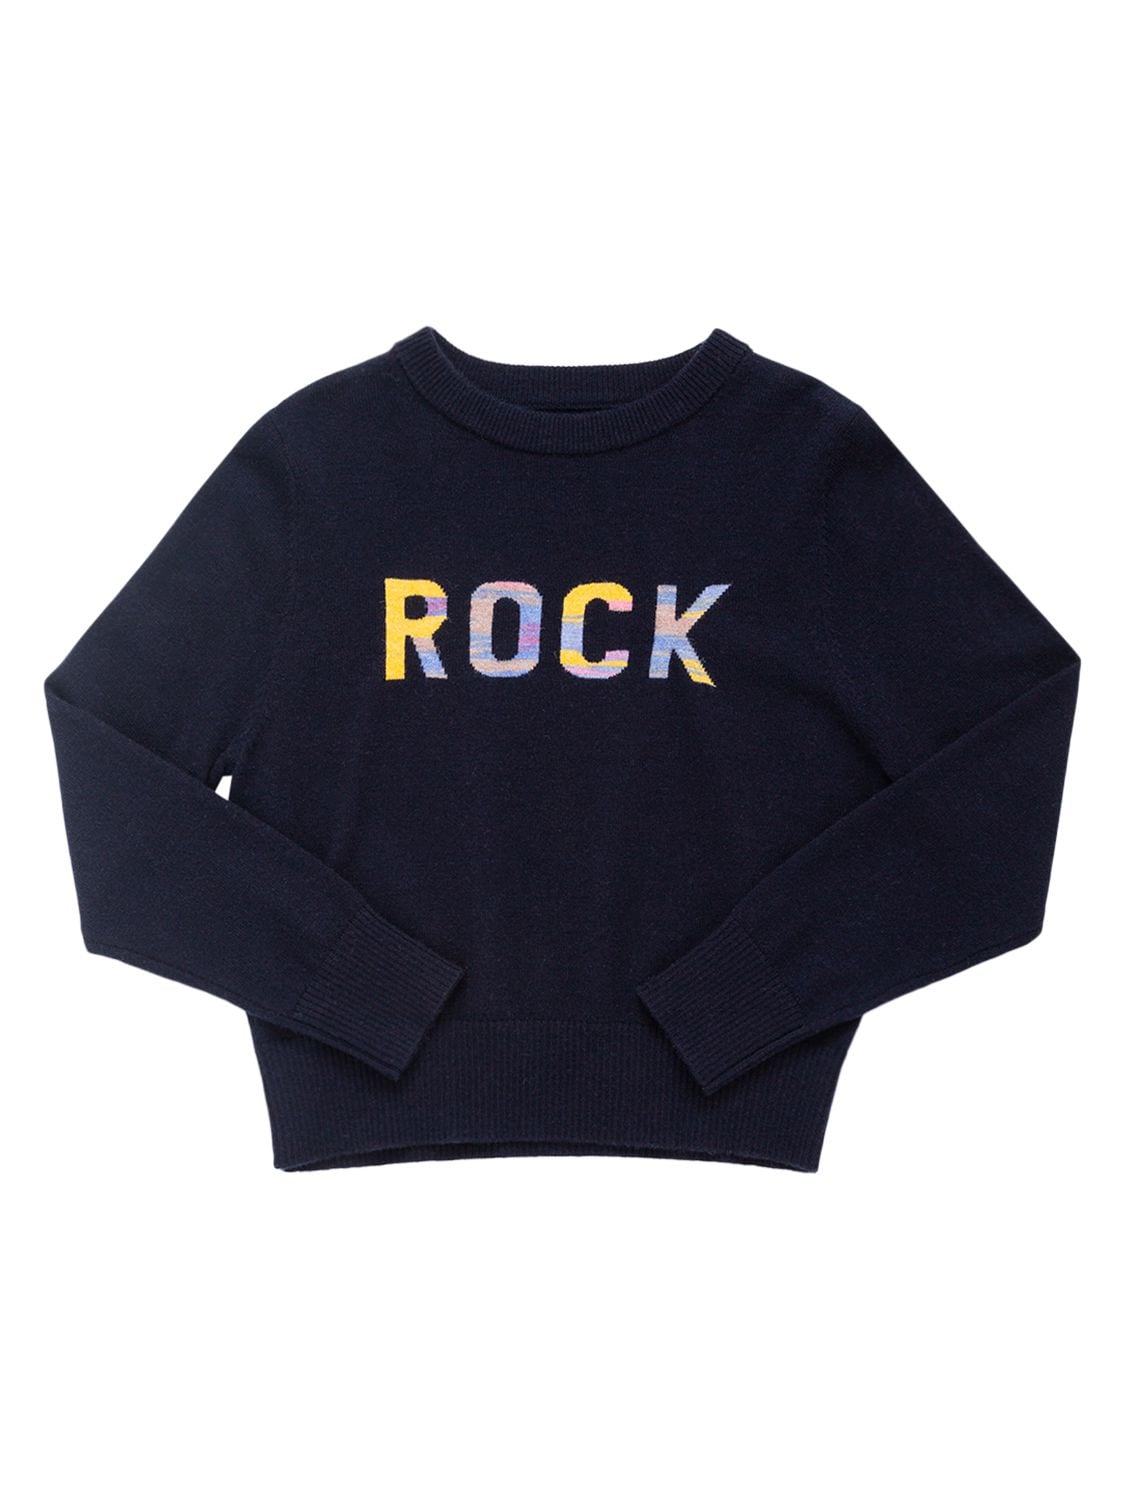 Zadig & Voltaire Kids' Jacquard Knit Recycled Wool Sweater In Navy